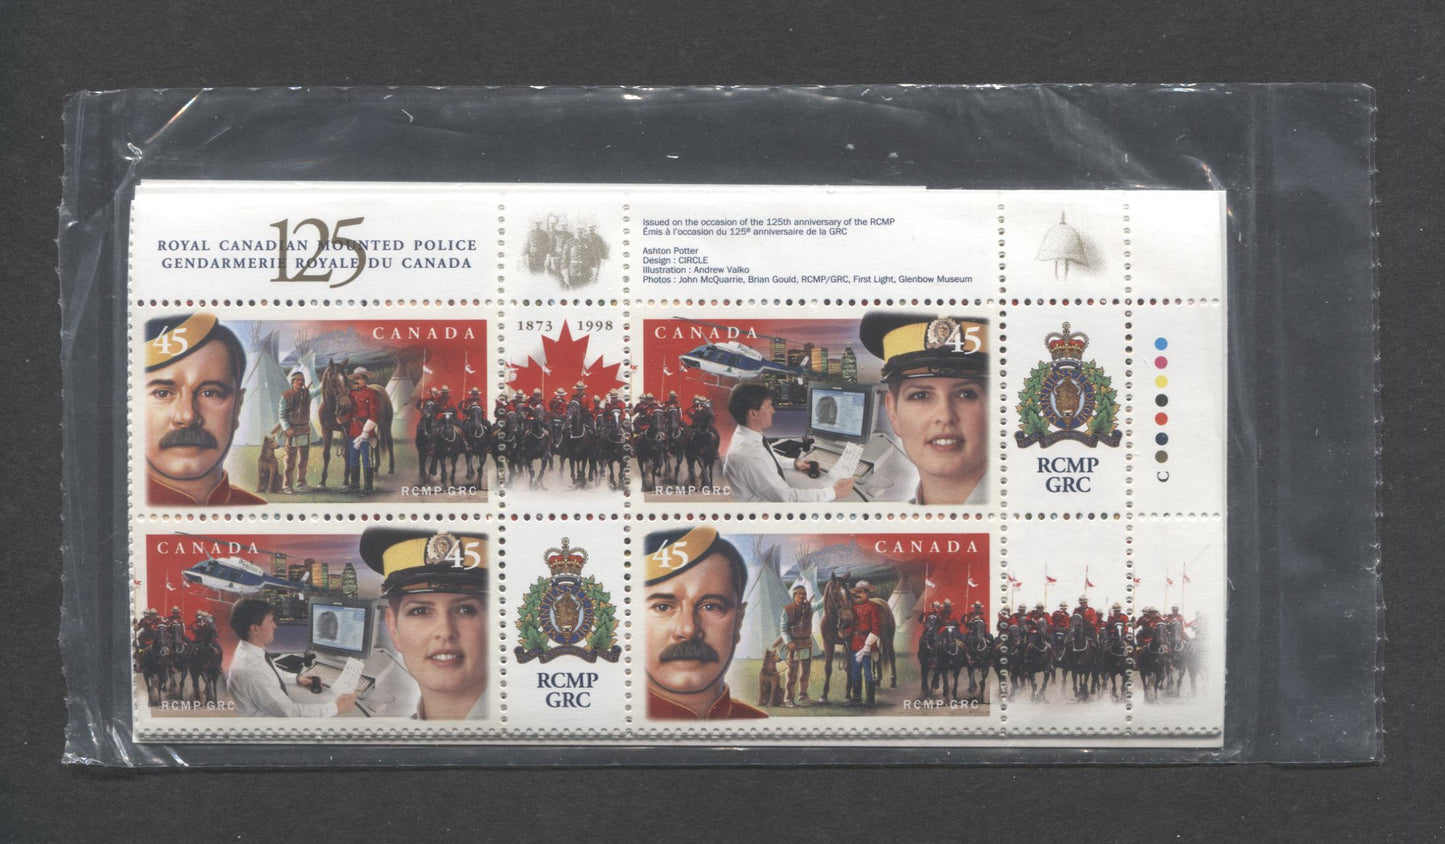 Lot 328 Canada #1737a 45c Multicolored Historic View - Modern View 1998 RCMP 125th Anniversary, Canada Post Sealed Pack of Inscription Blocks on TRC Paper With HB Over A DF Type 7A Insert Card, VFNH, Unitrade Cat. $8